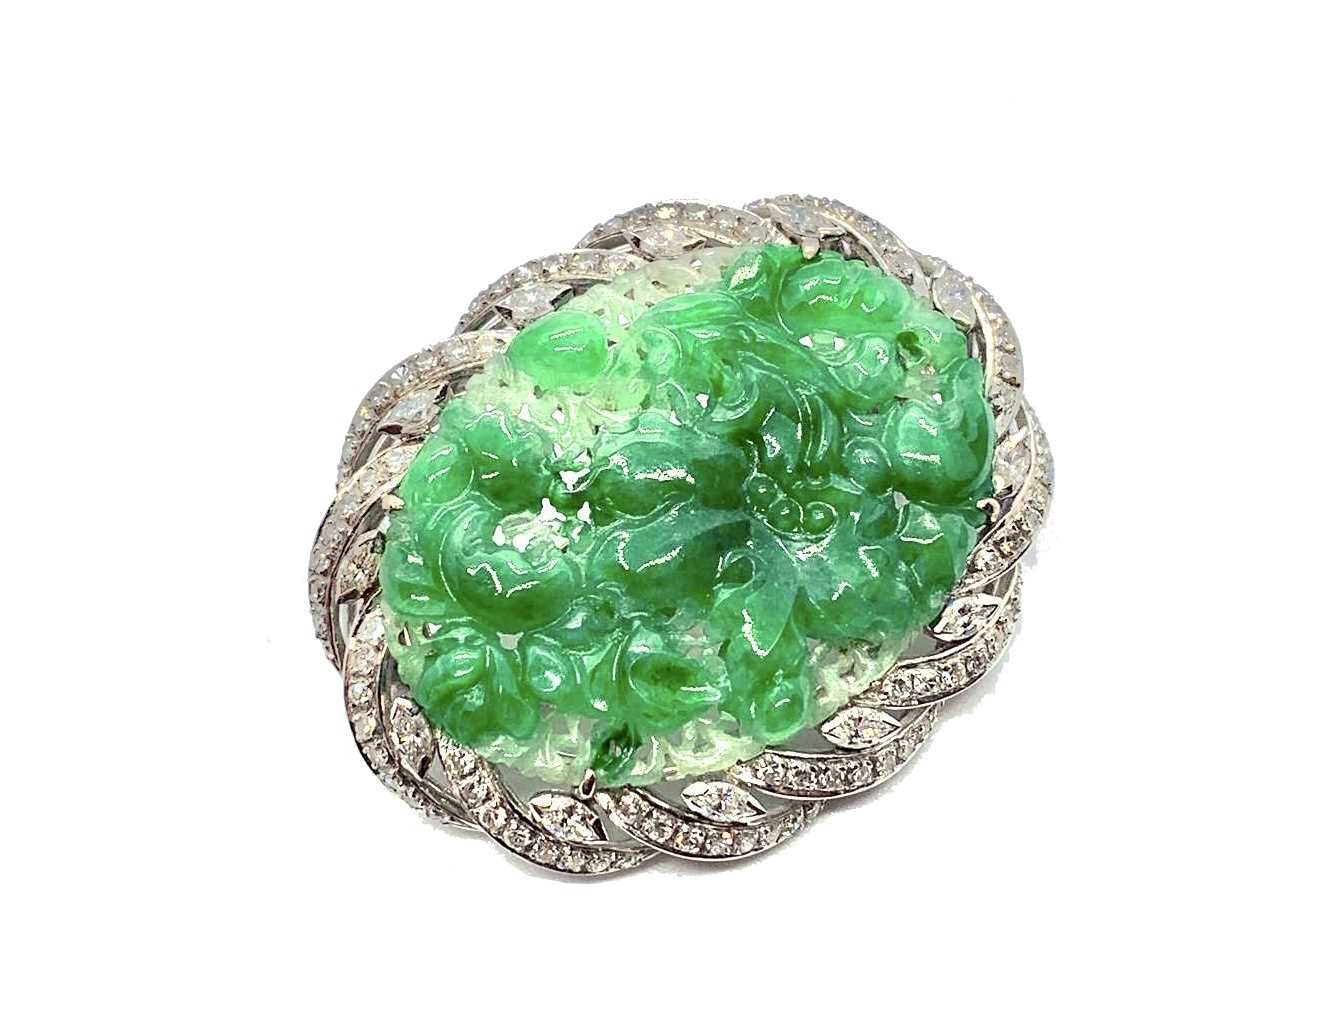 An 18ct white gold jade and diamond brooch, the central piece of carved jade surrounded by diamonds.